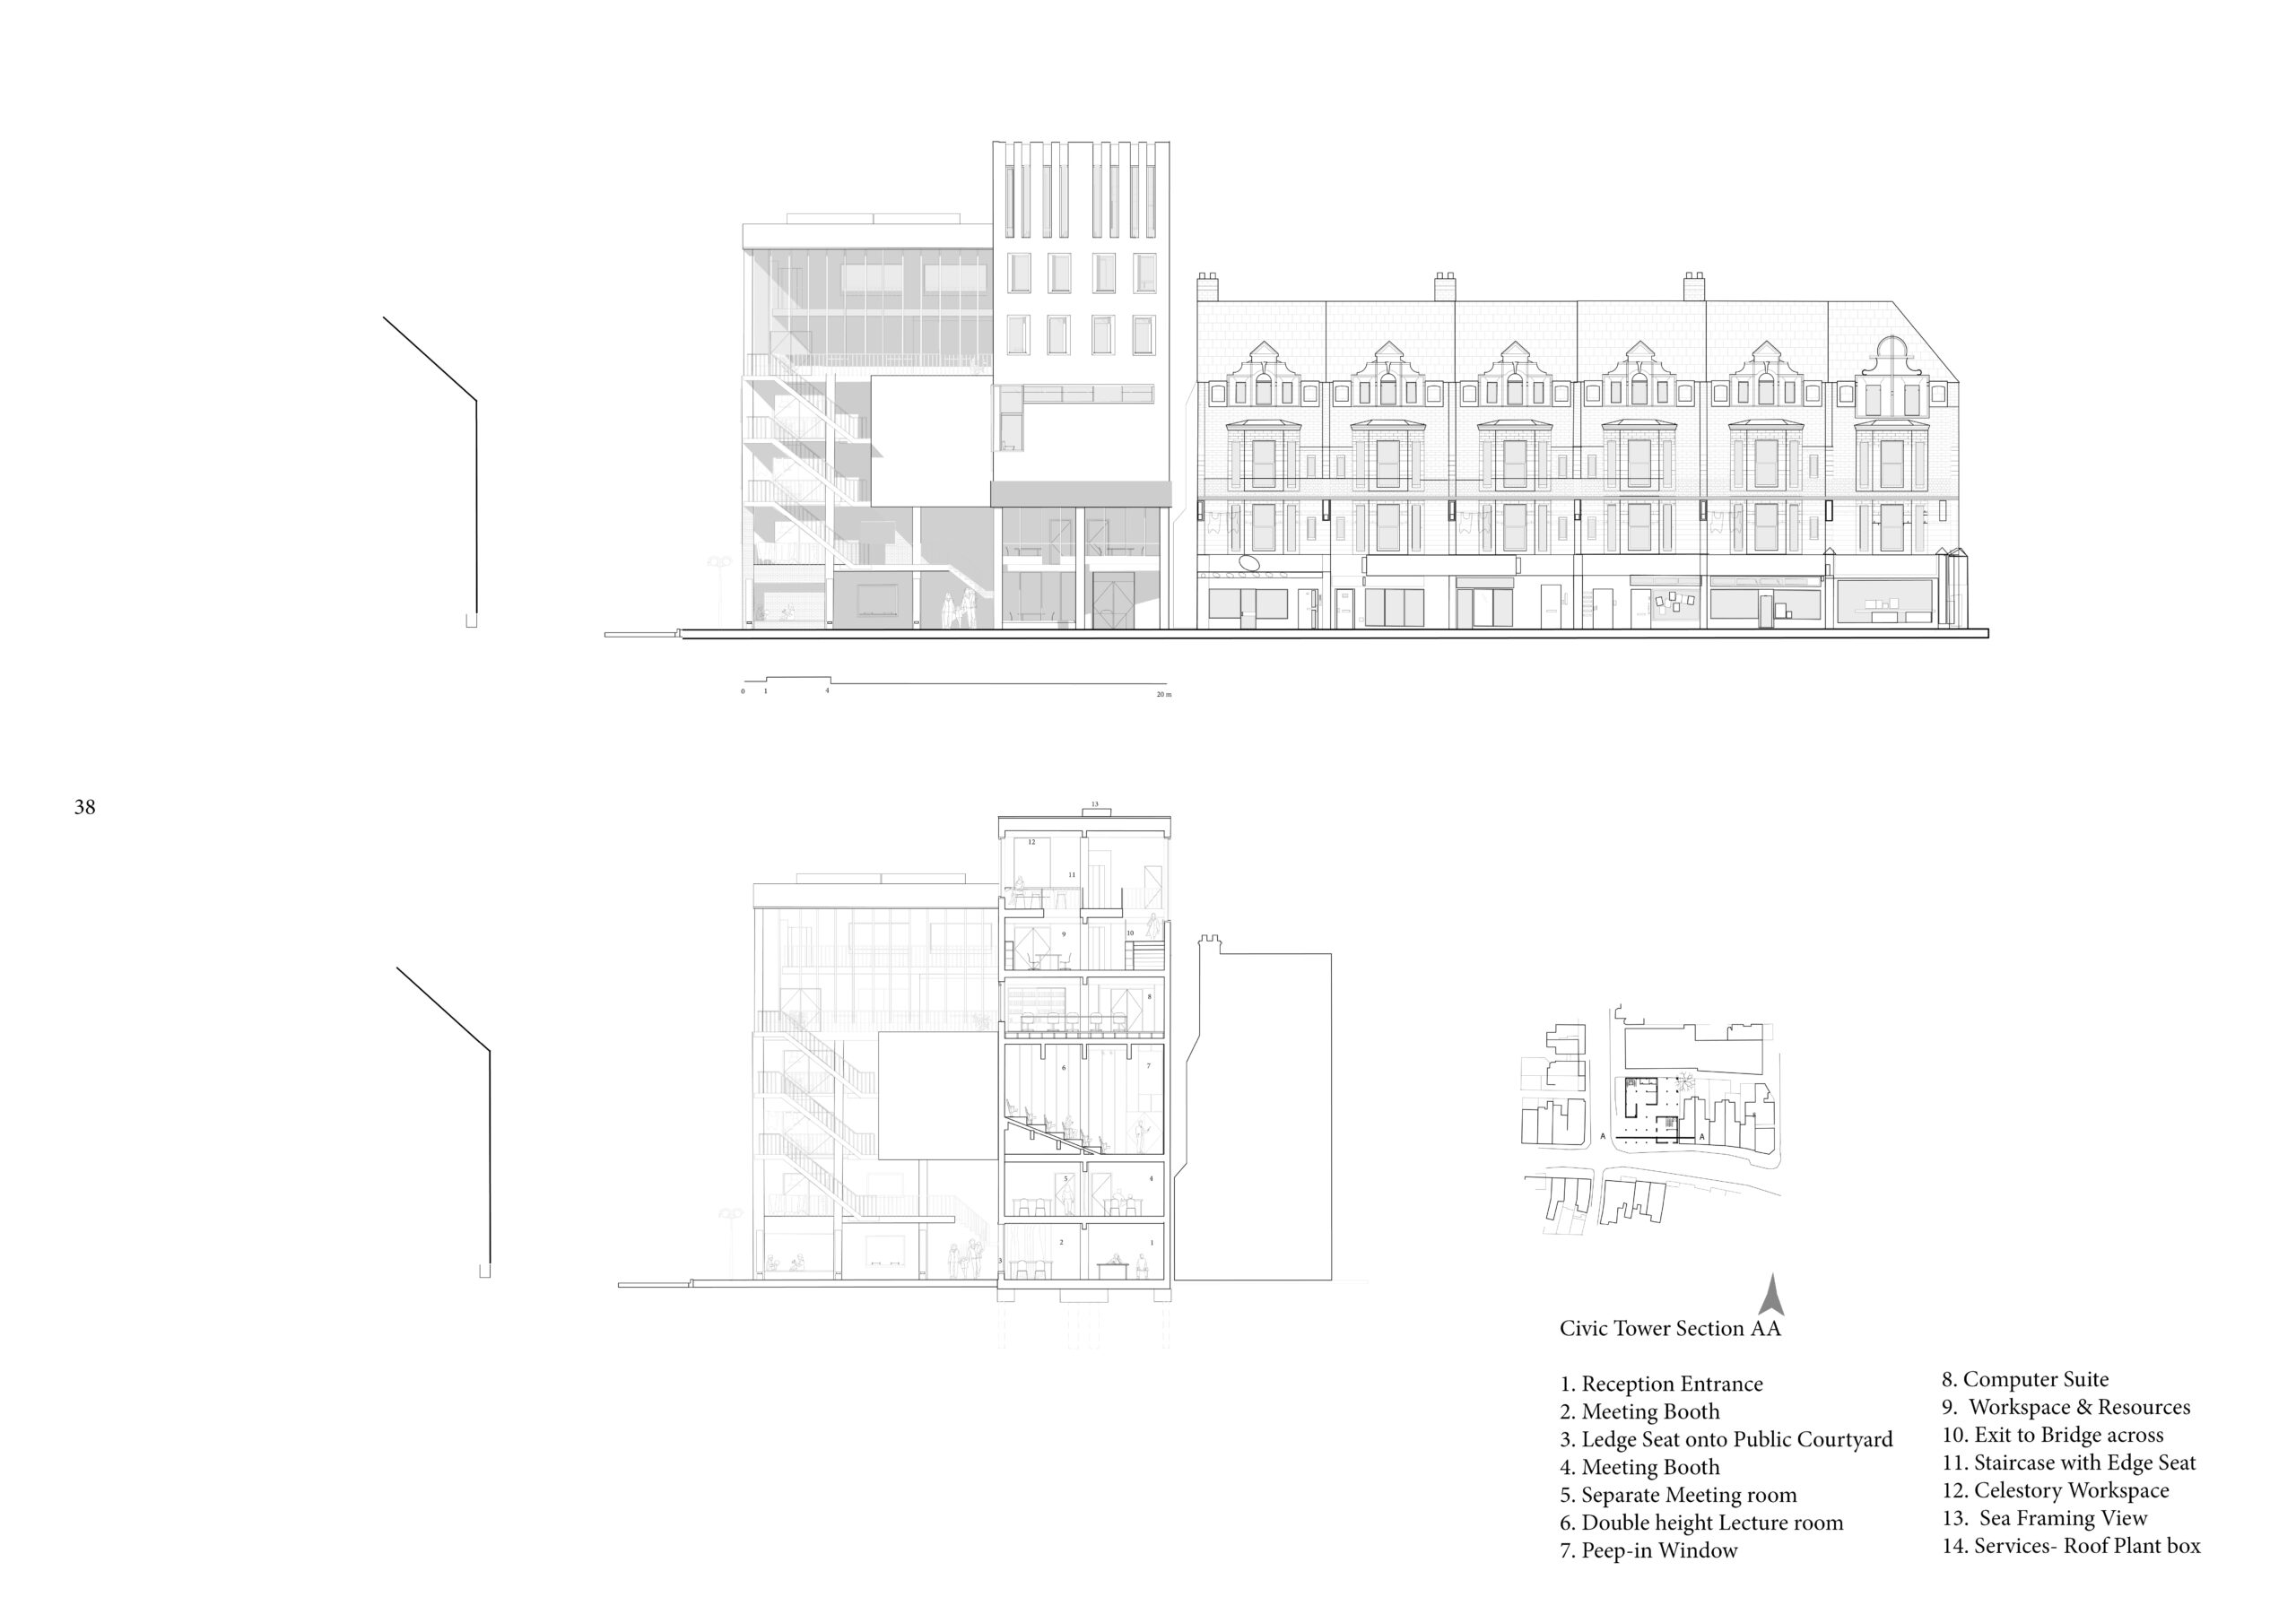 Section and elevation of the civic